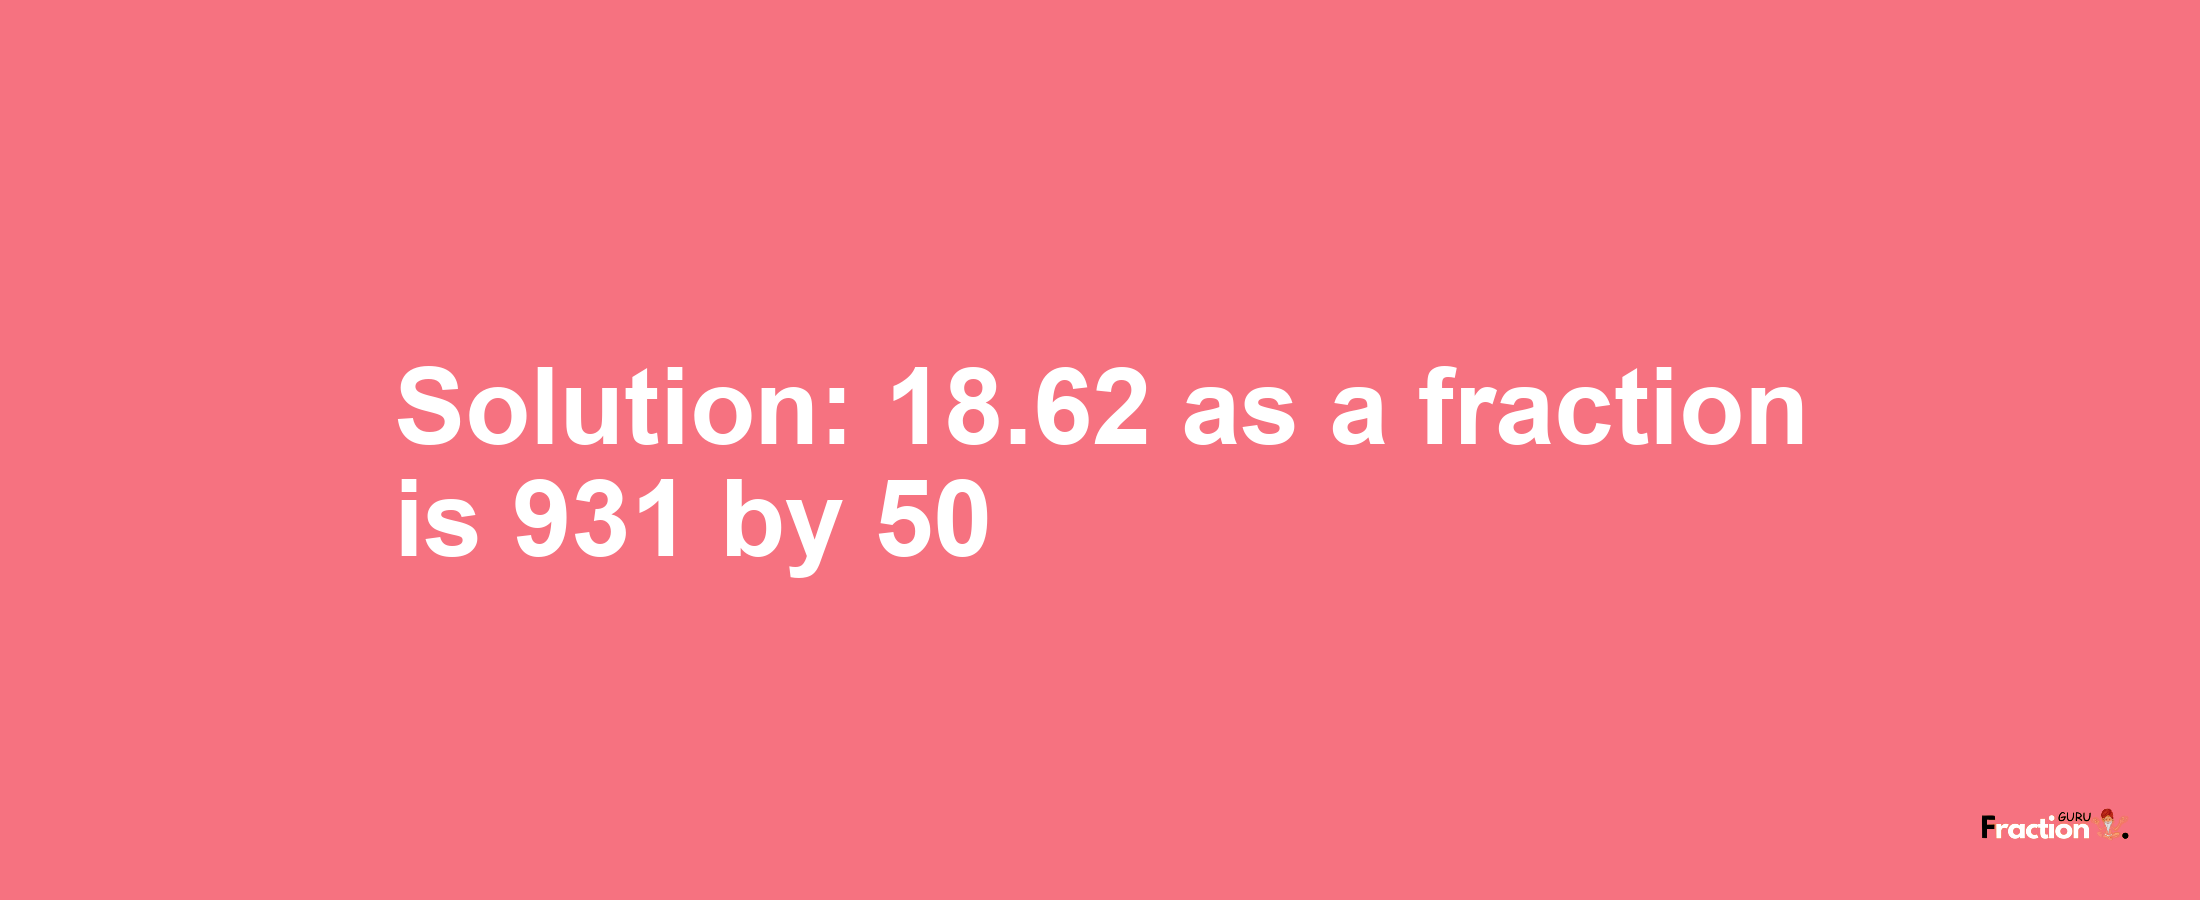 Solution:18.62 as a fraction is 931/50